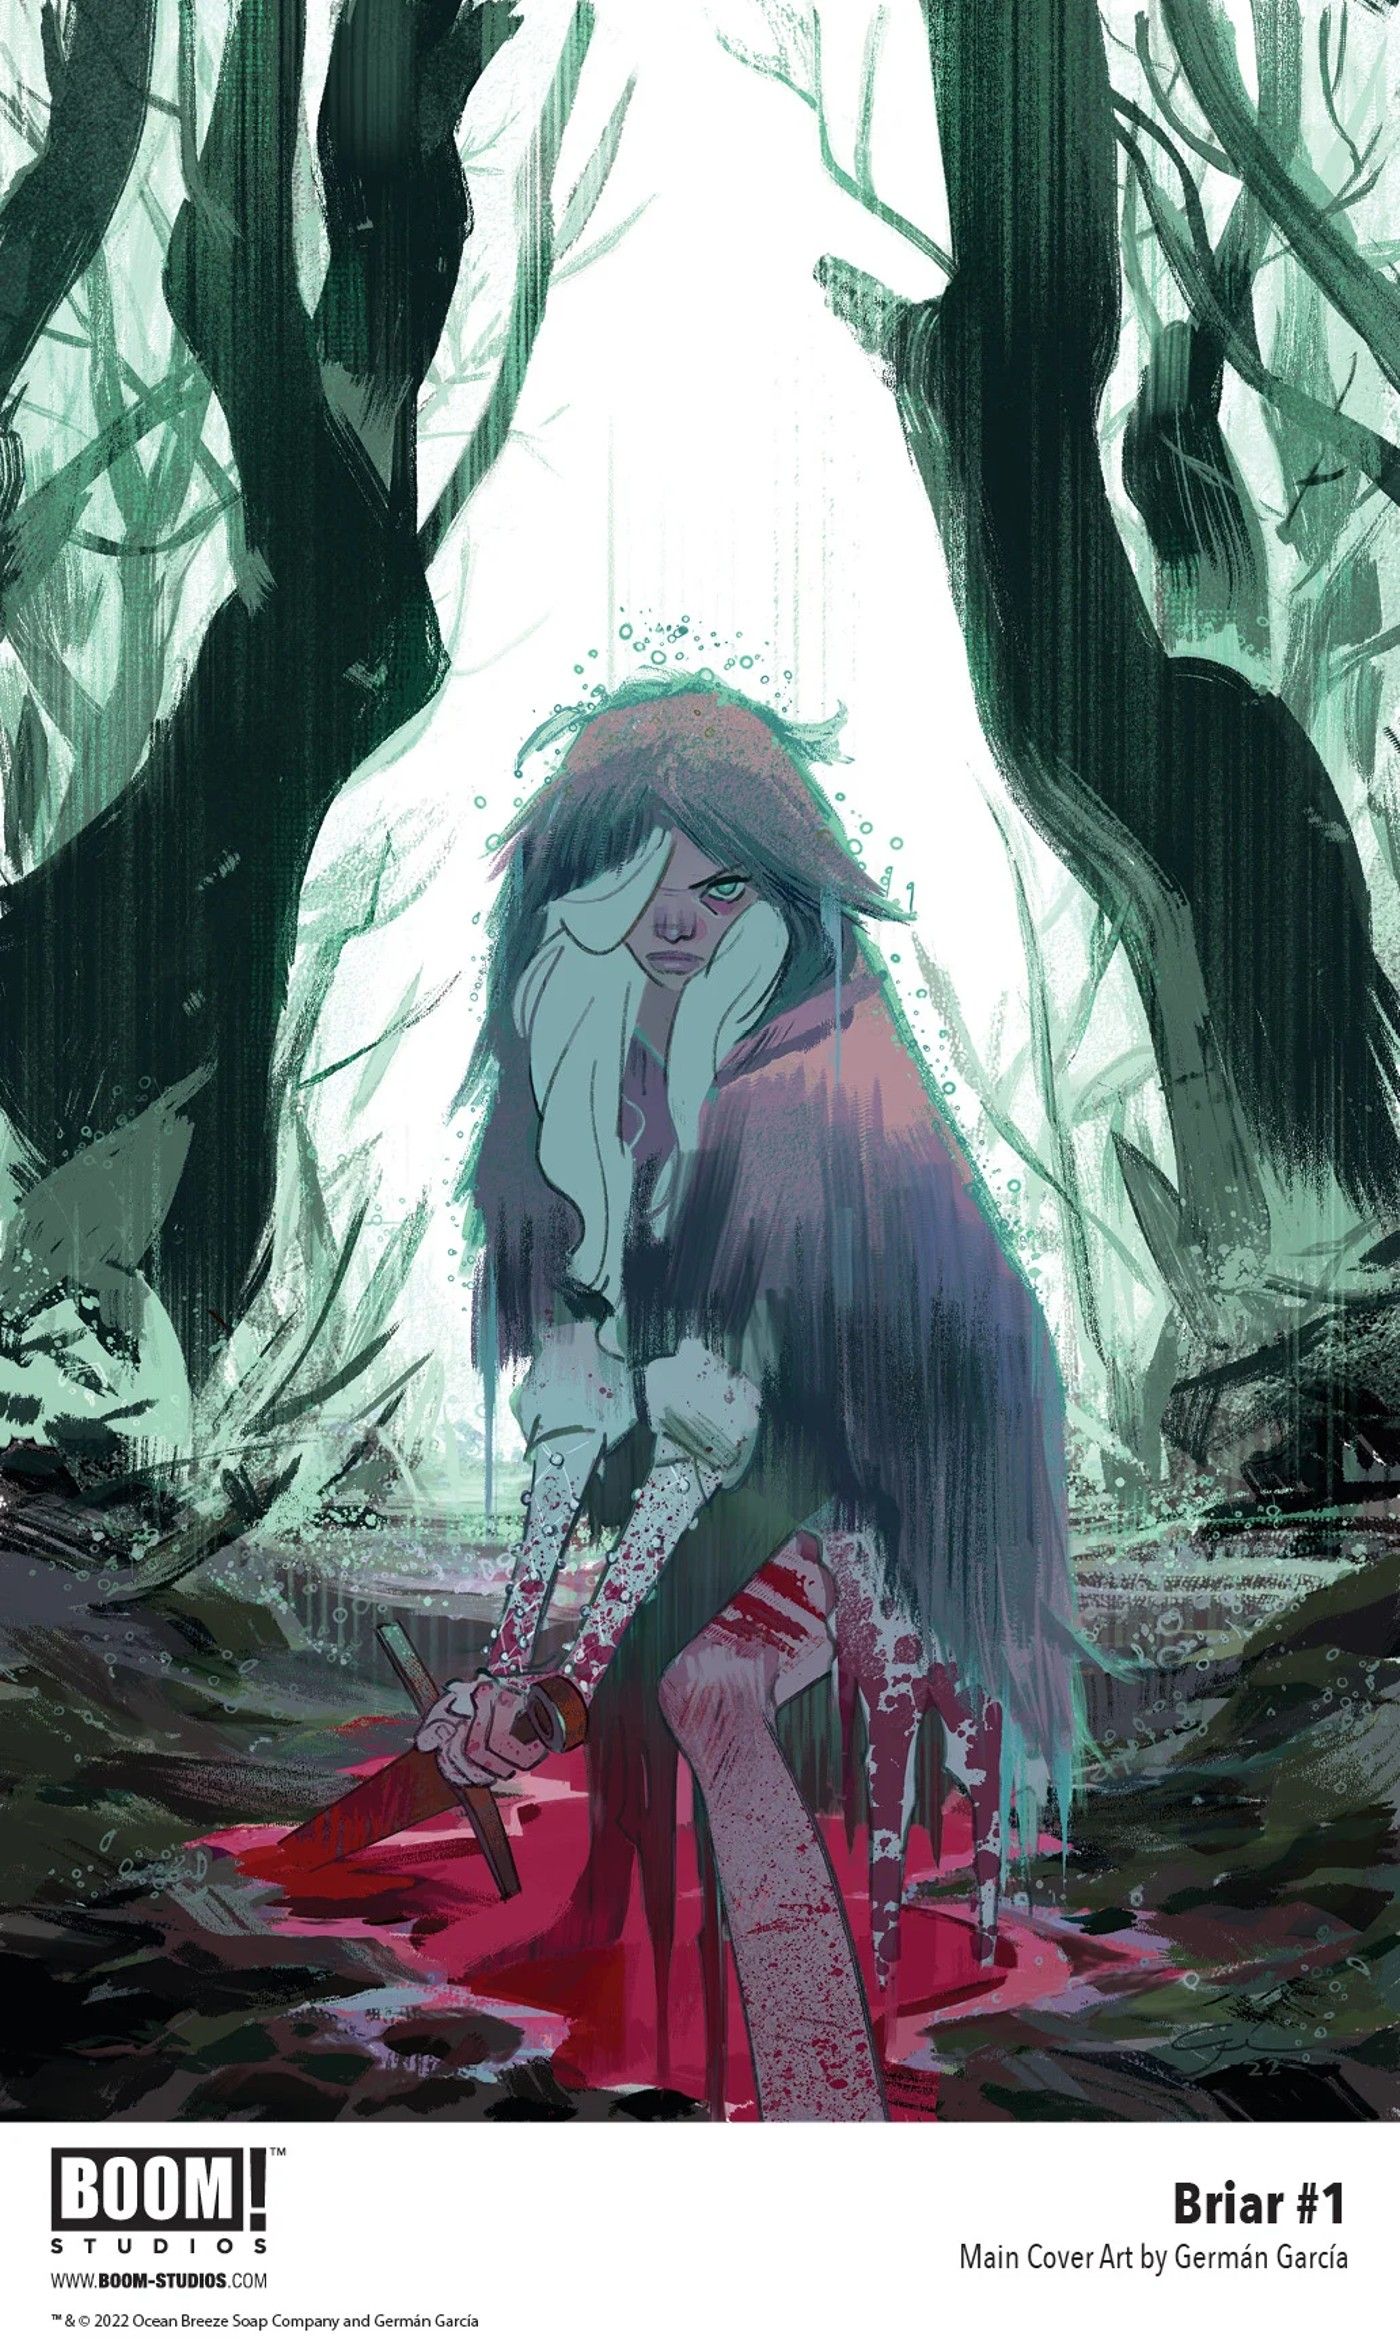 Sleeping Beauty Goes Back to Its Grim Roots With a Twist in New Series